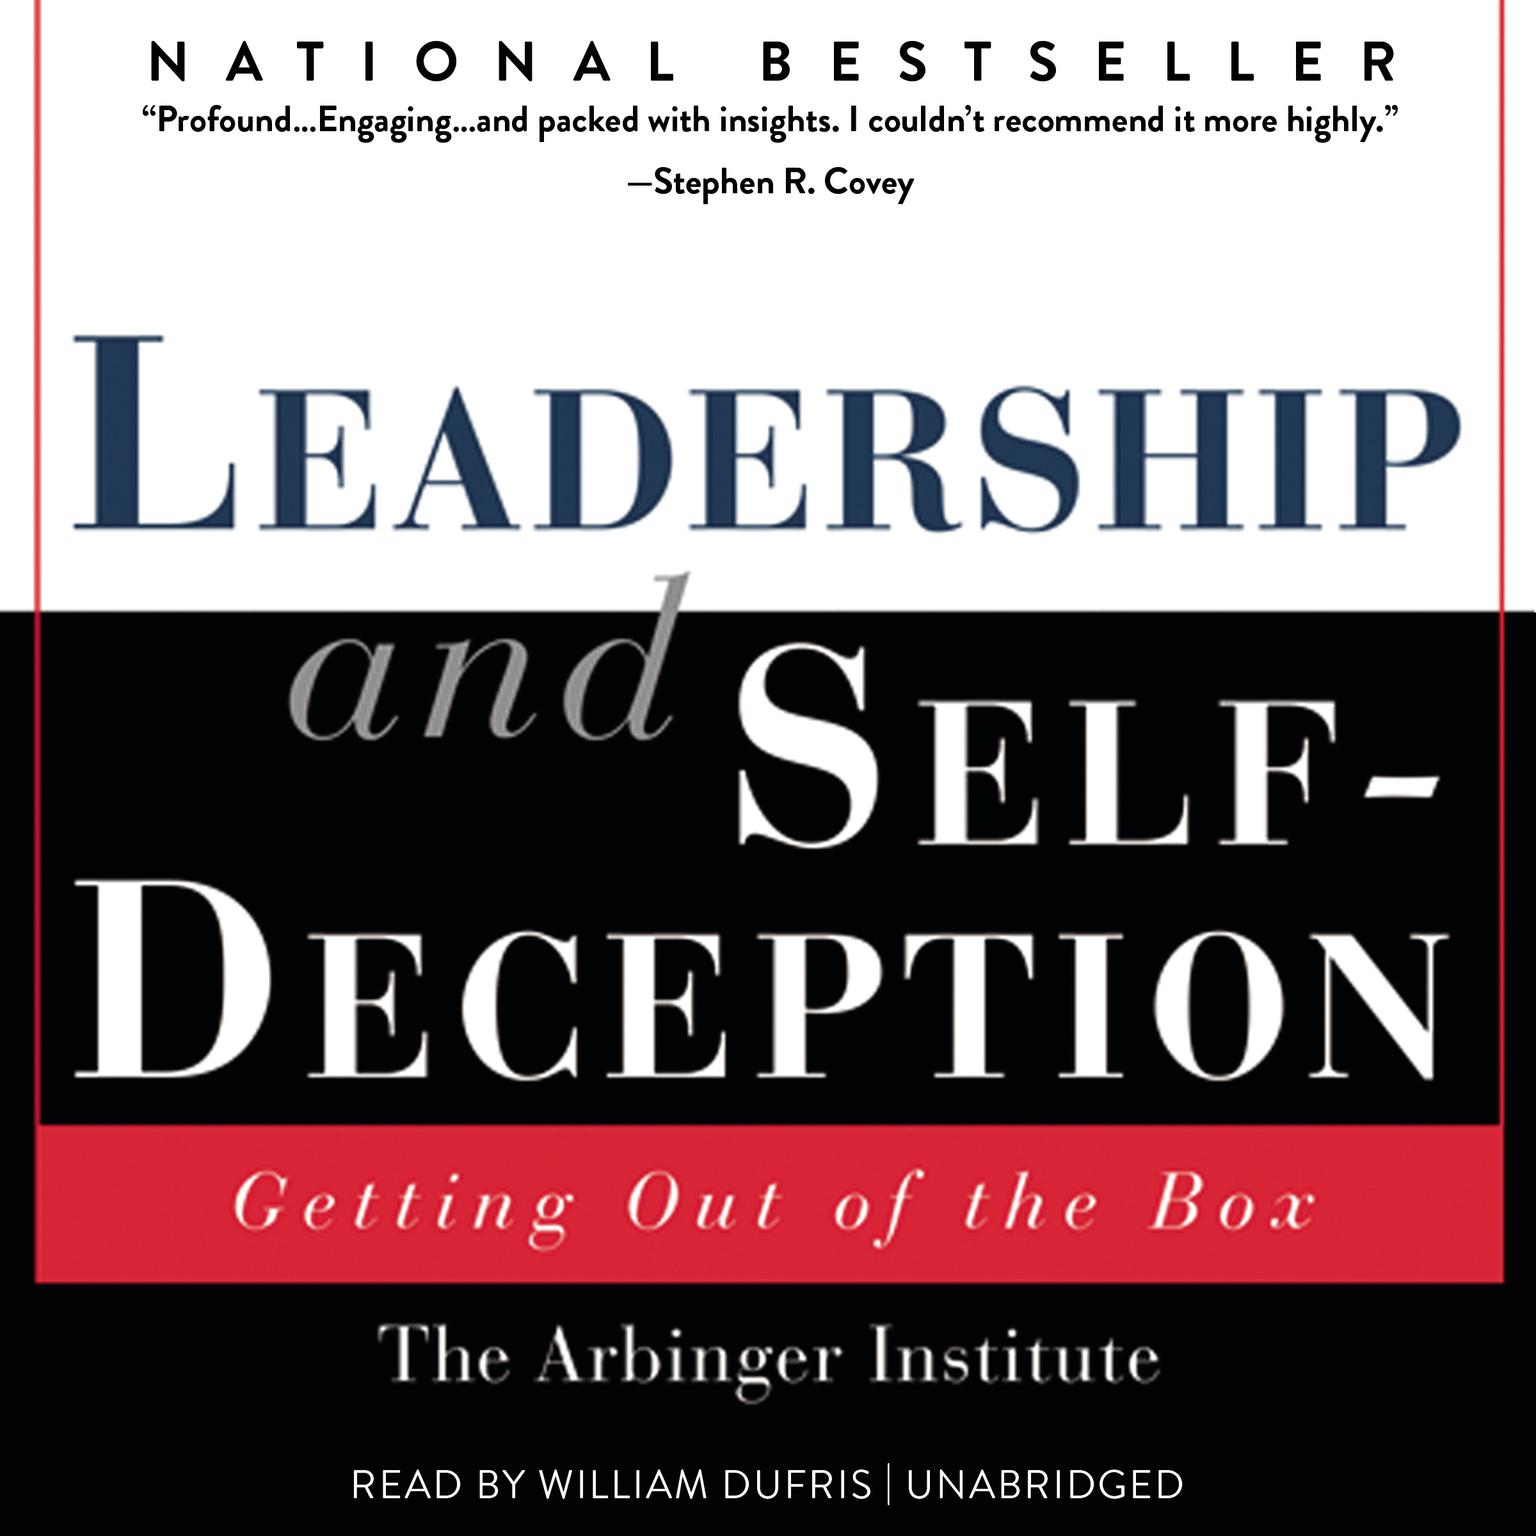 Leadership and Self-Deception: Getting out of the Box Audiobook, by the Arbinger Institute